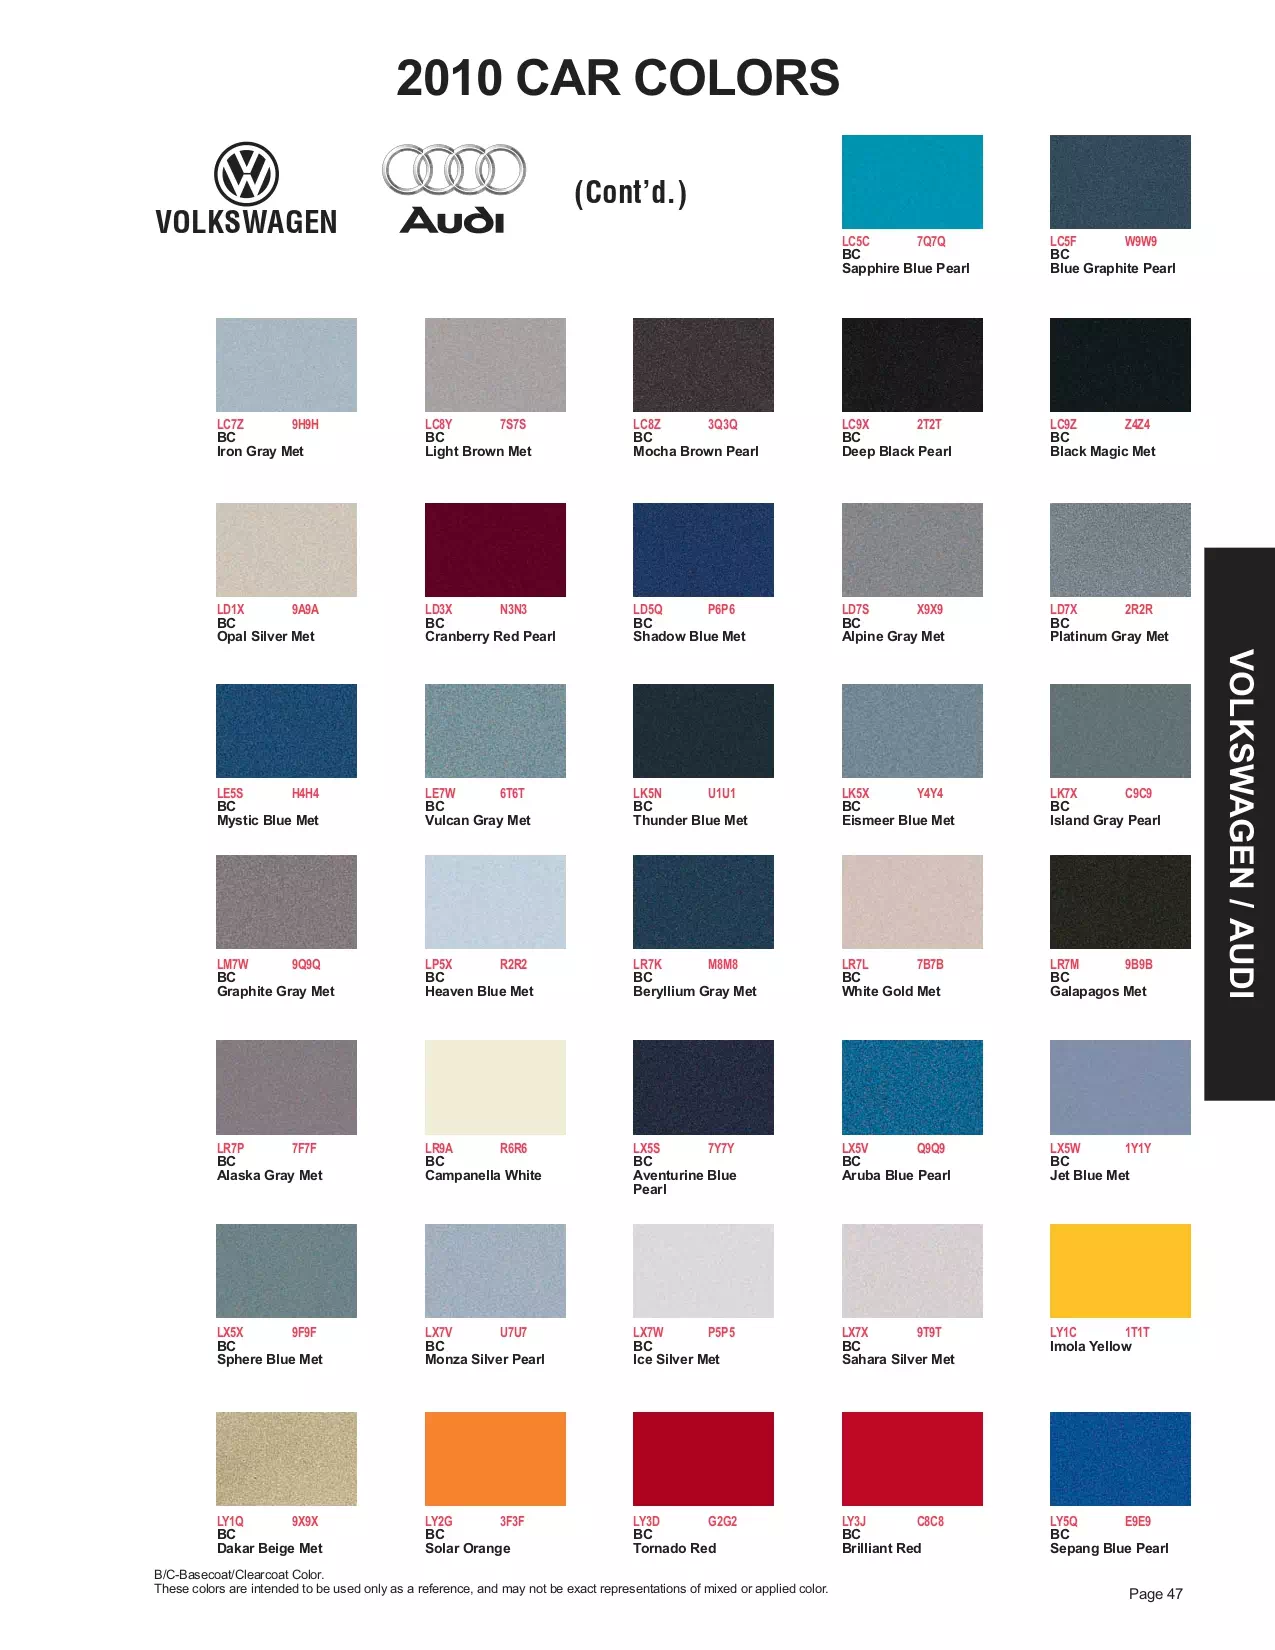 Exterior color examples and their codes used on 2010 Volkswagen and Audi Vehicles